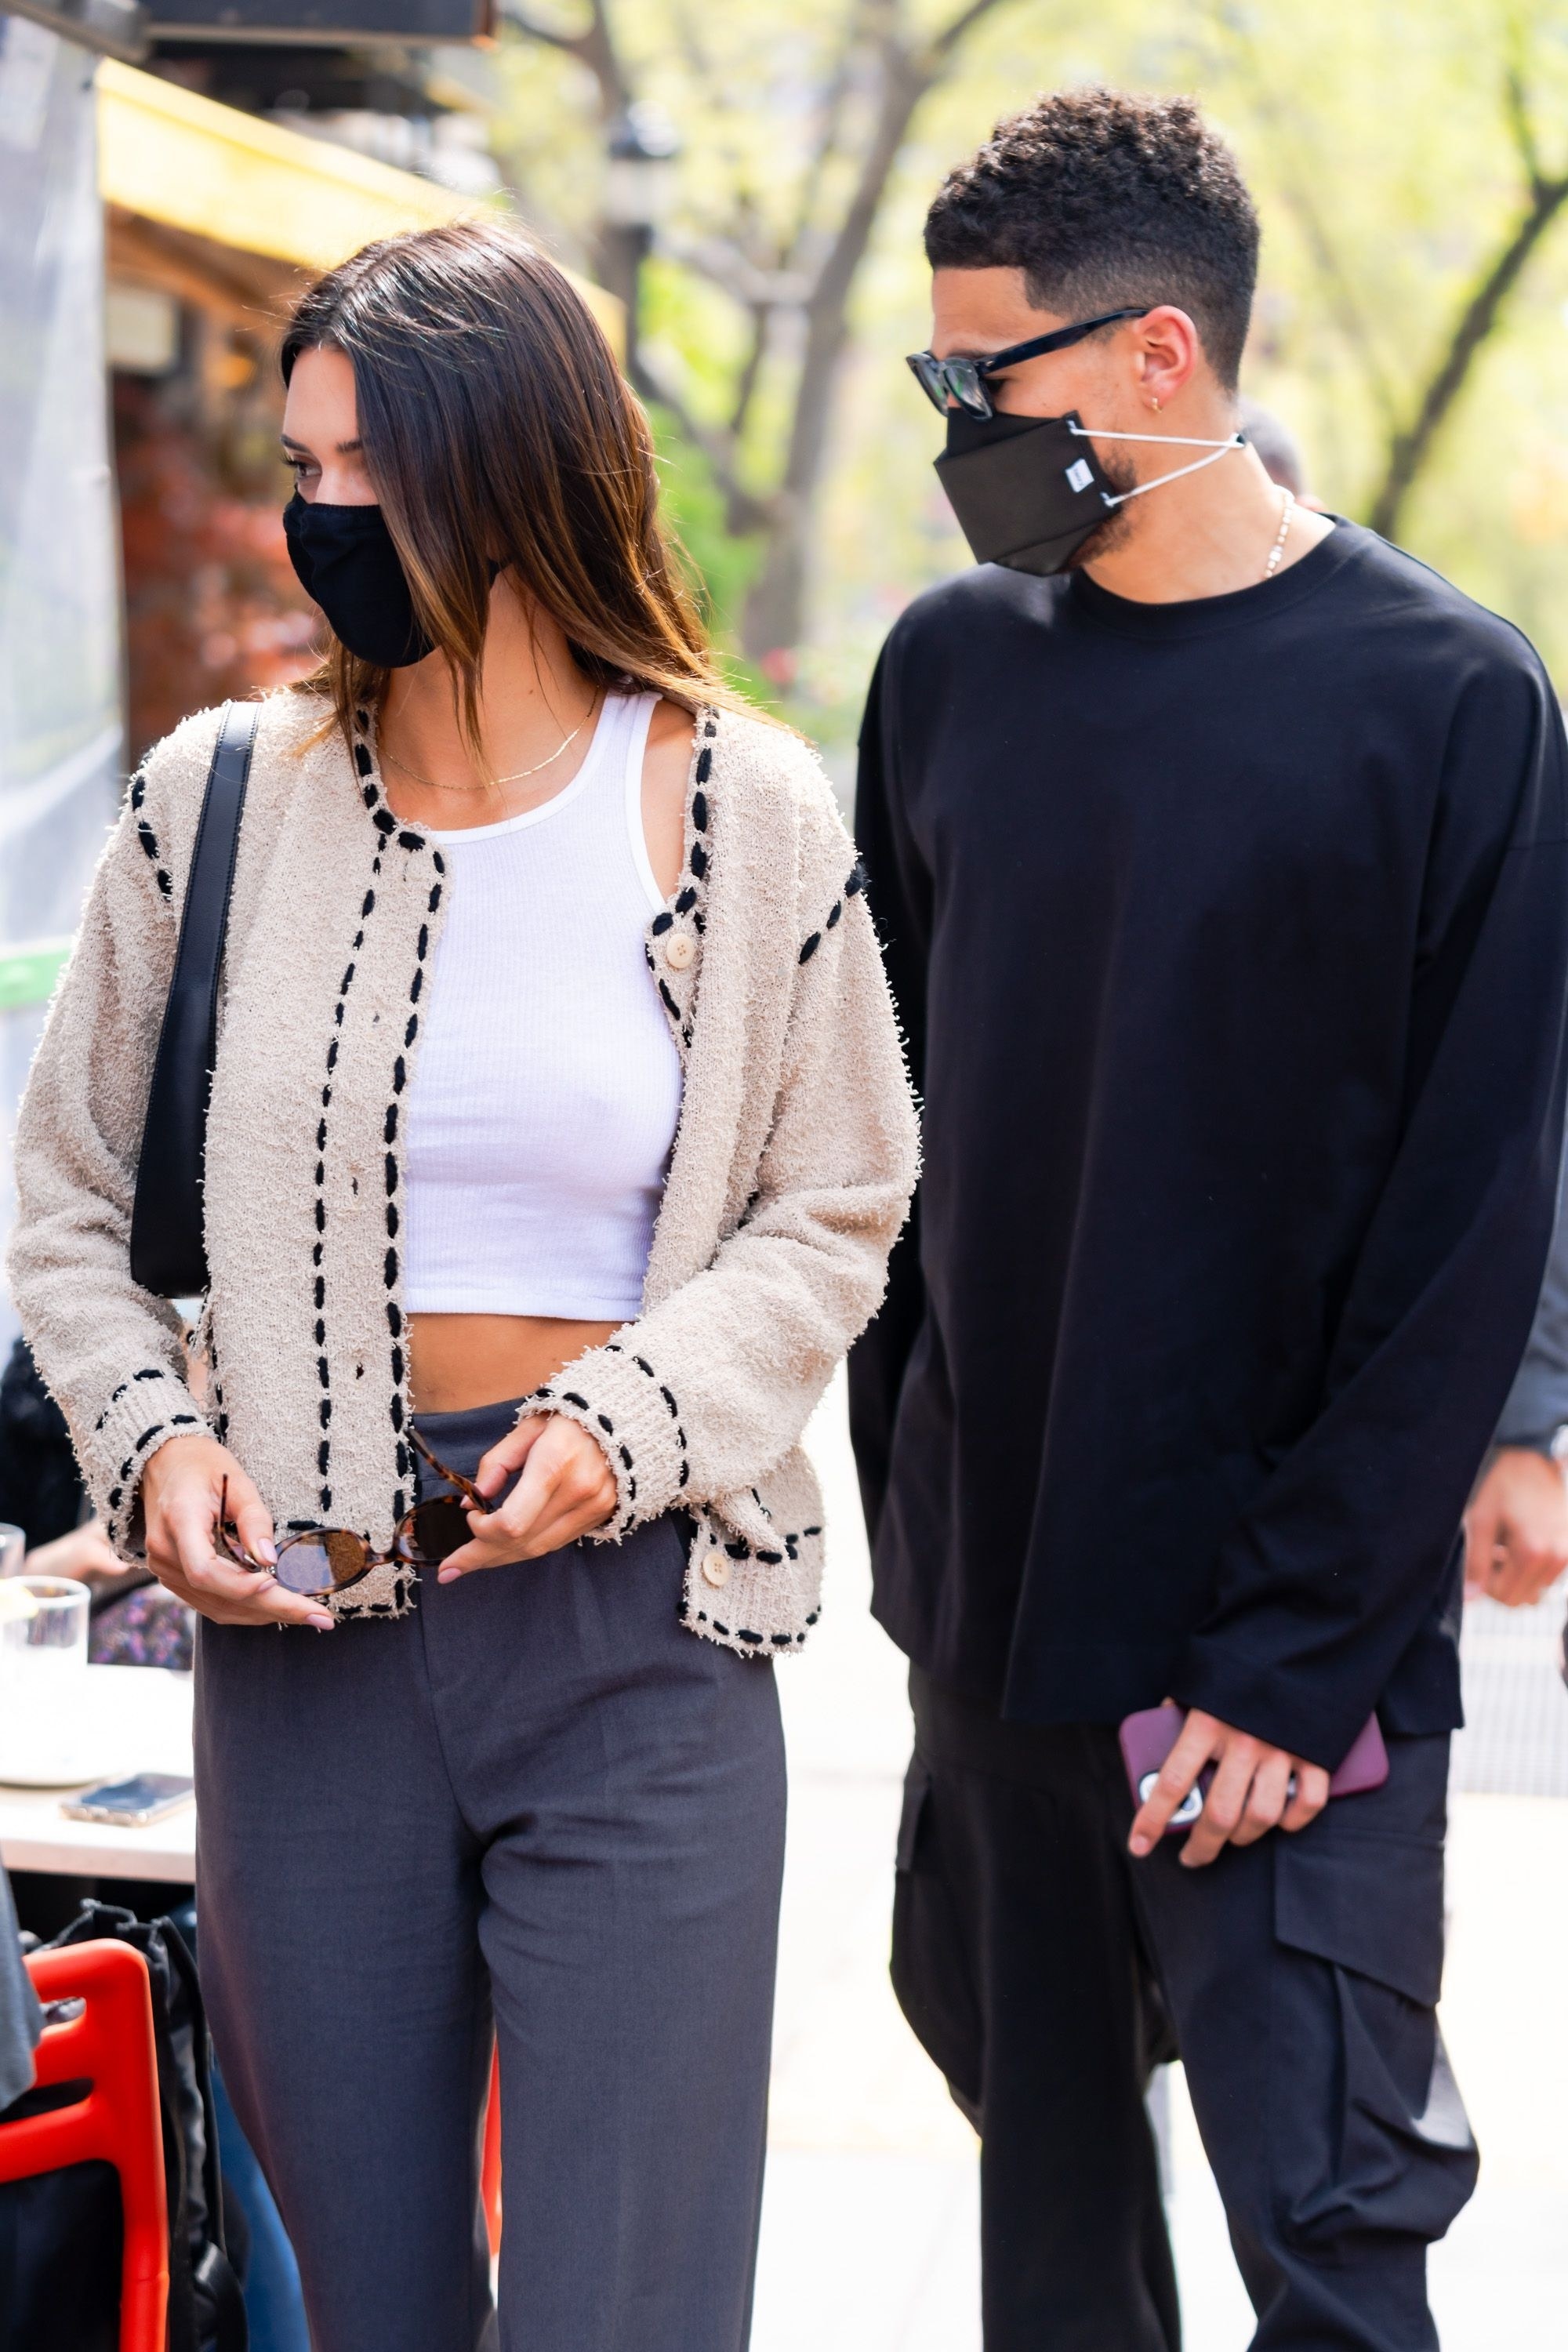 Kendall Jenner (L) and Devin Booker are seen in SoHo on April 24, 2021 in New York City